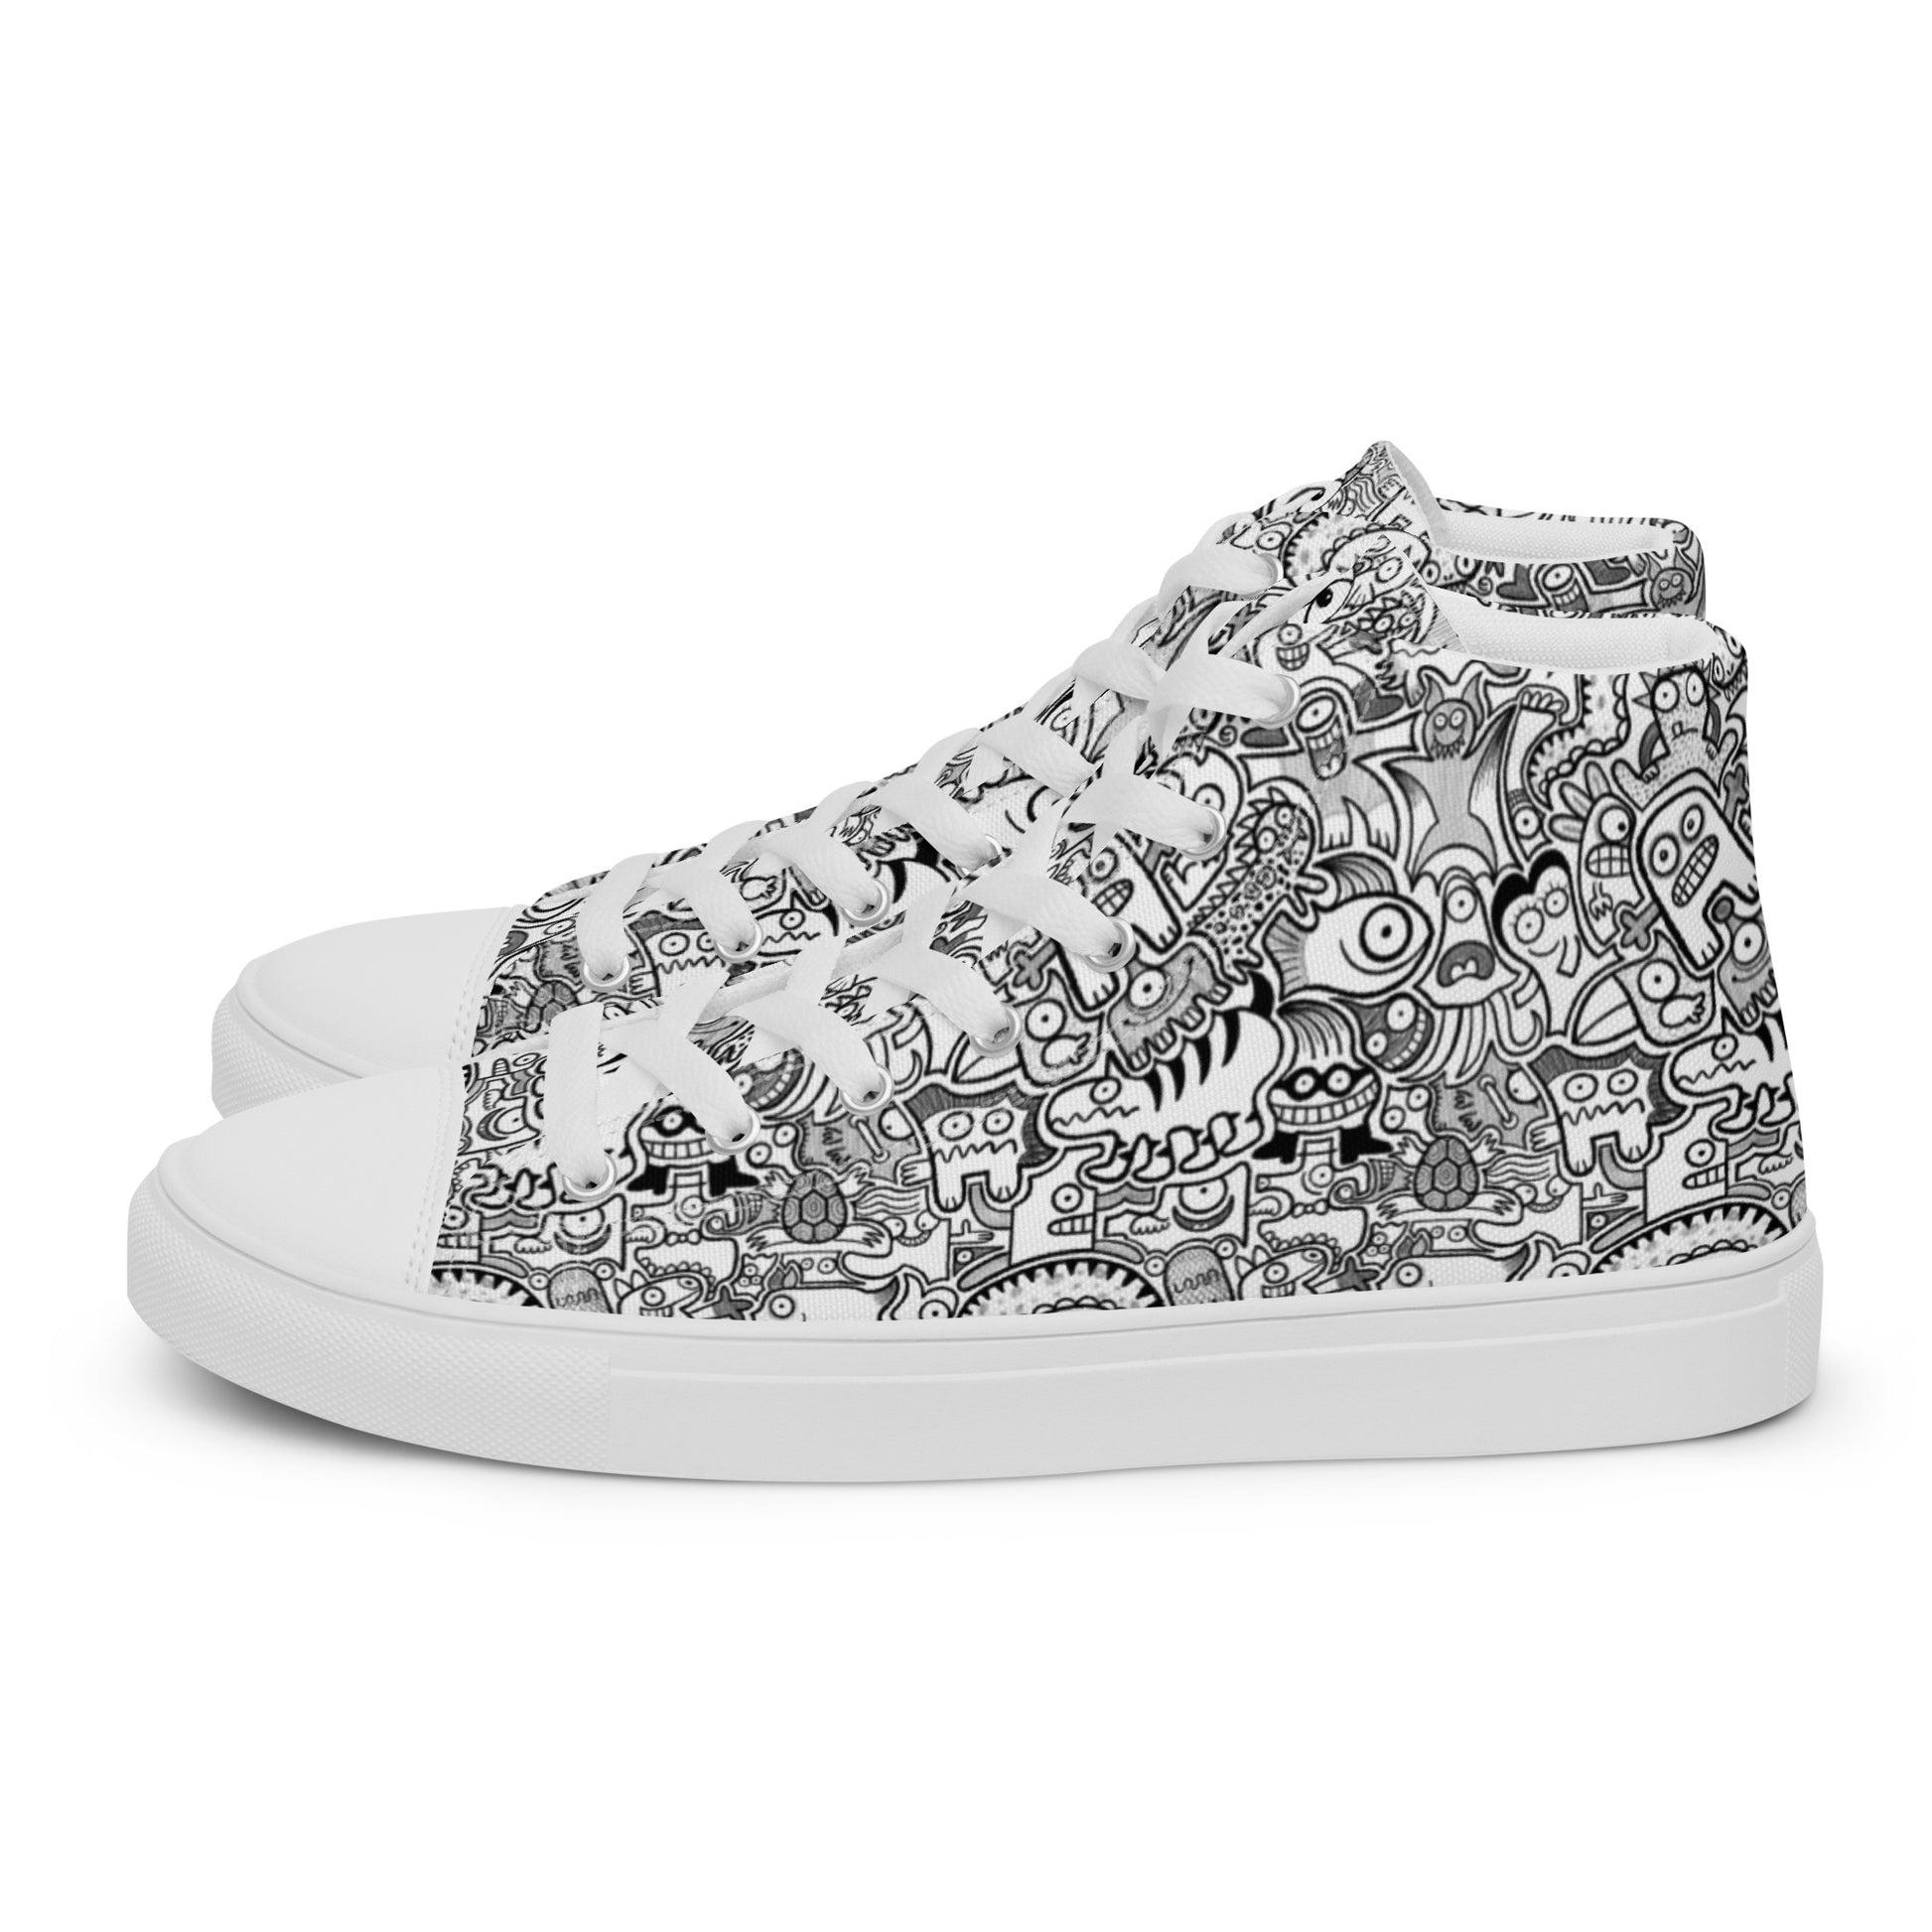 Fill your world with cool doodles Men’s high top canvas shoes. Side view